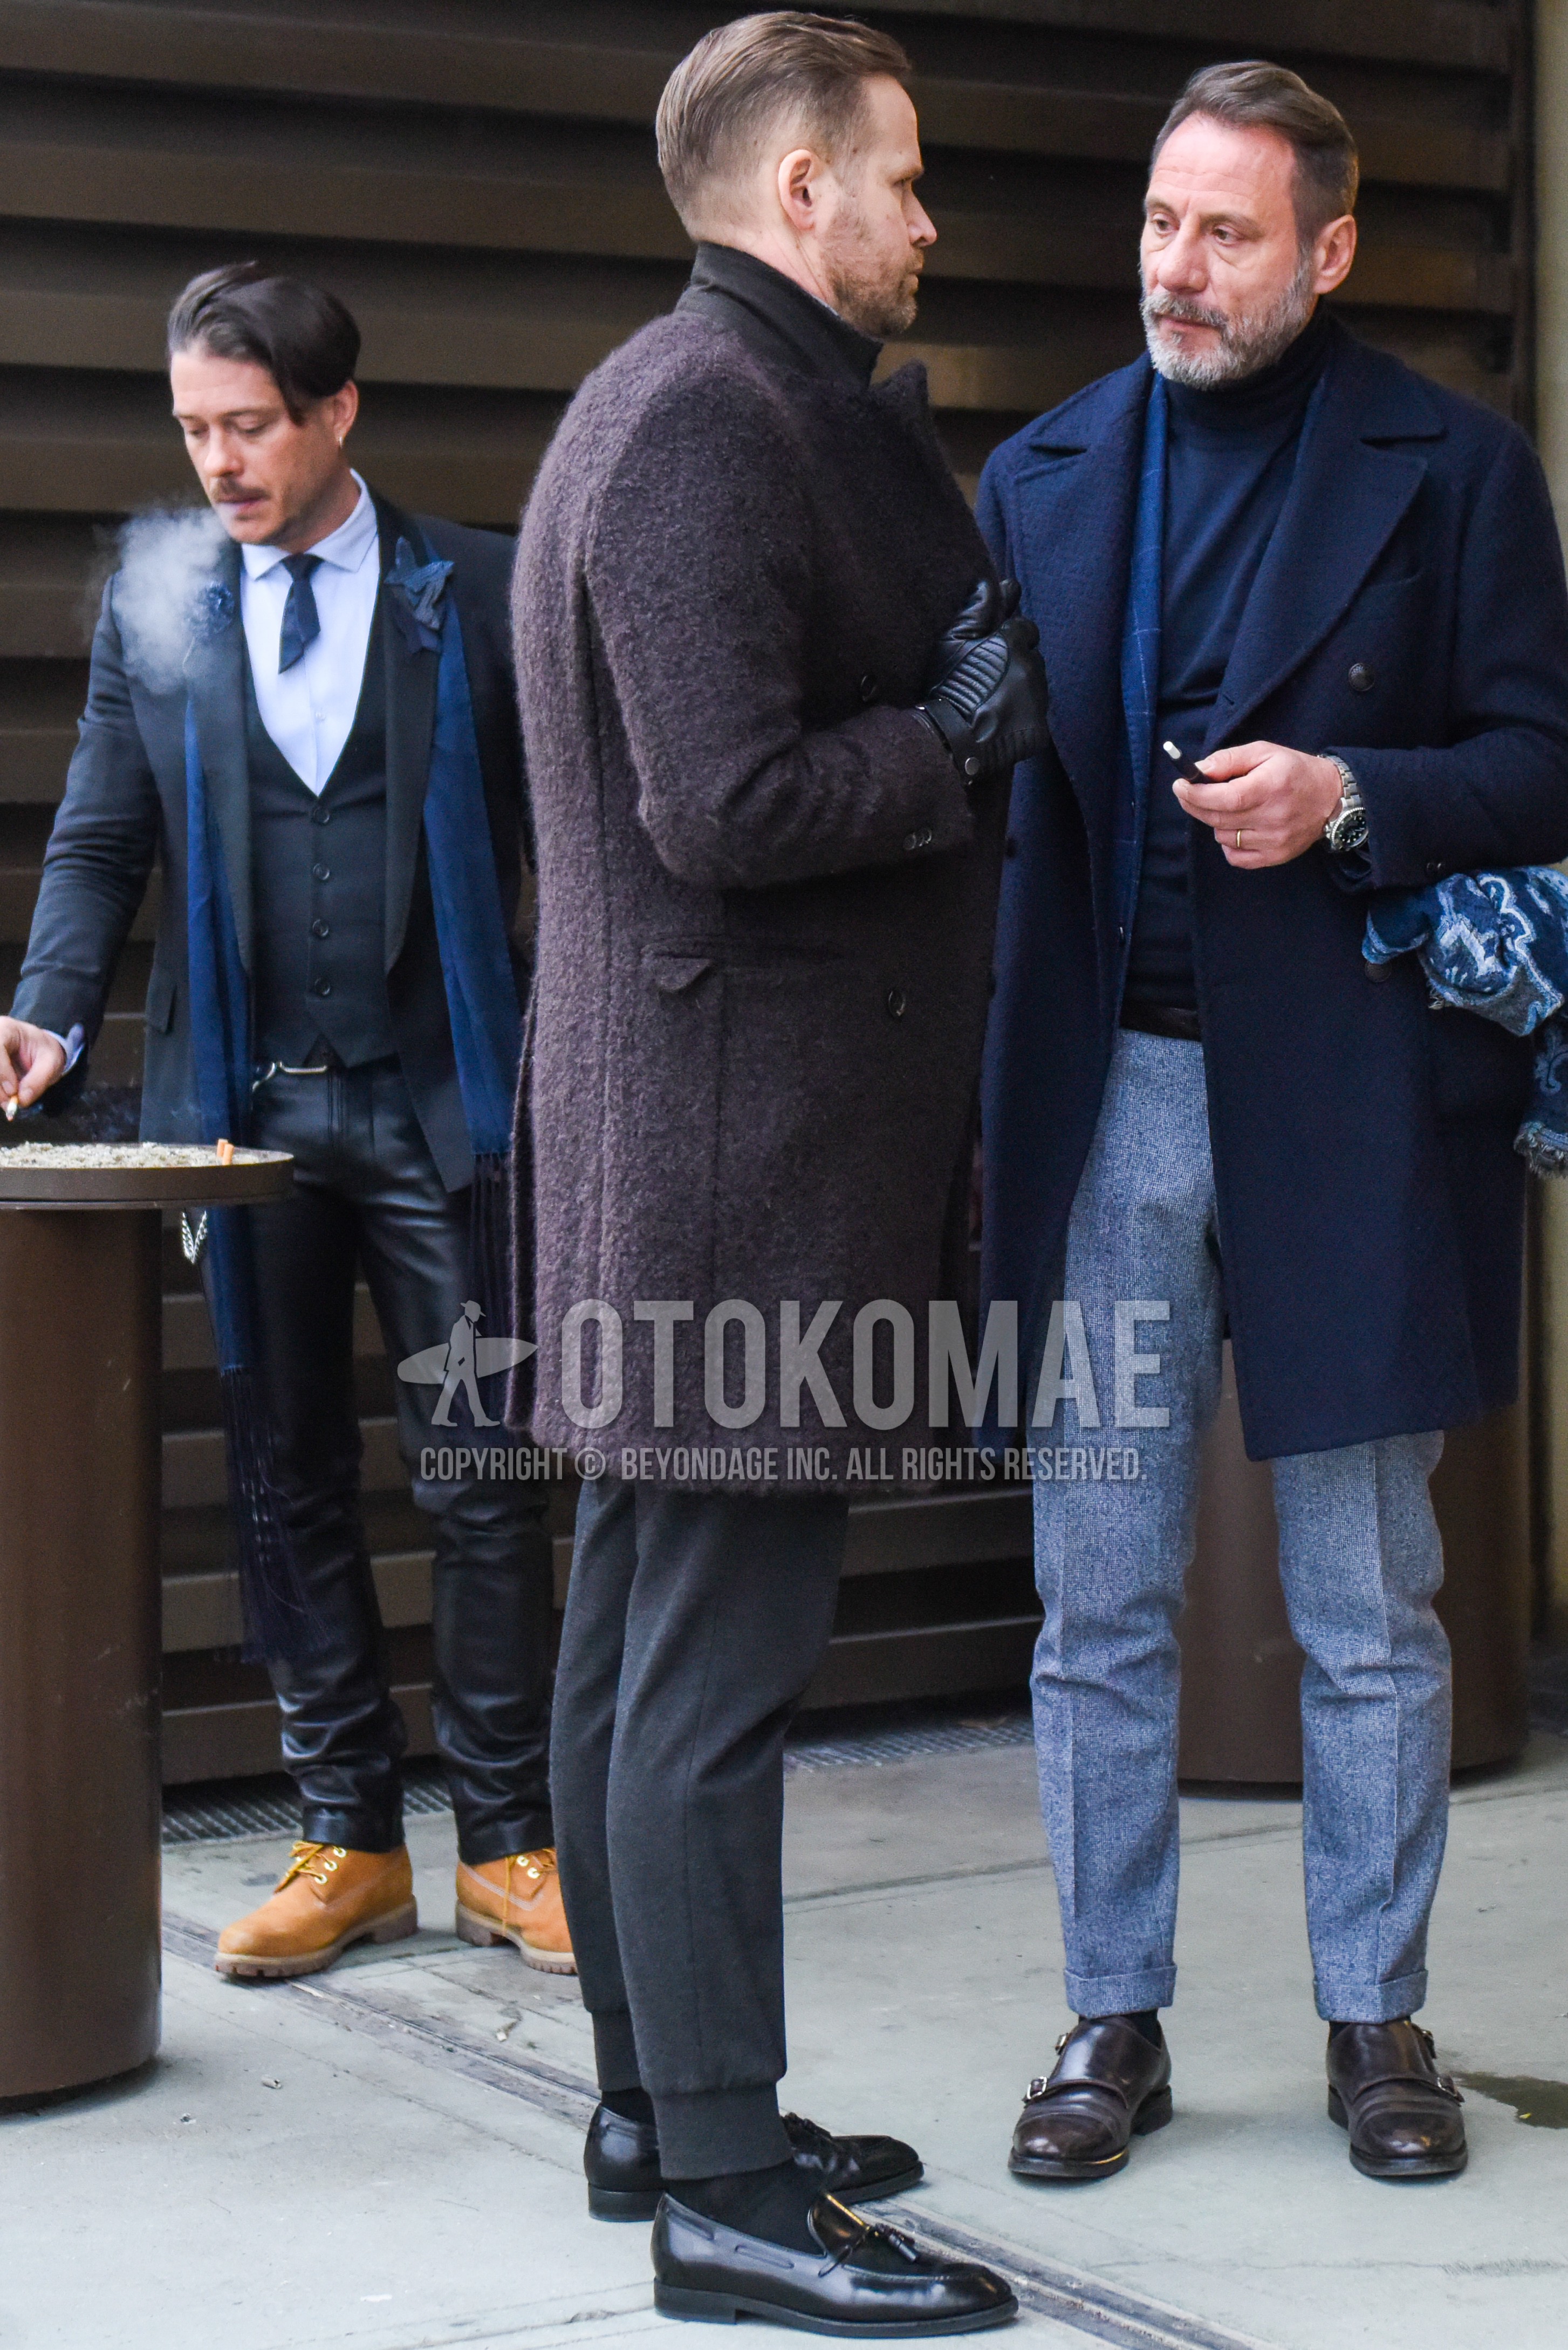 Men's autumn winter outfit with red gray plain chester coat, gray plain jogger pants/ribbed pants, black plain socks, black tassel loafers leather shoes.